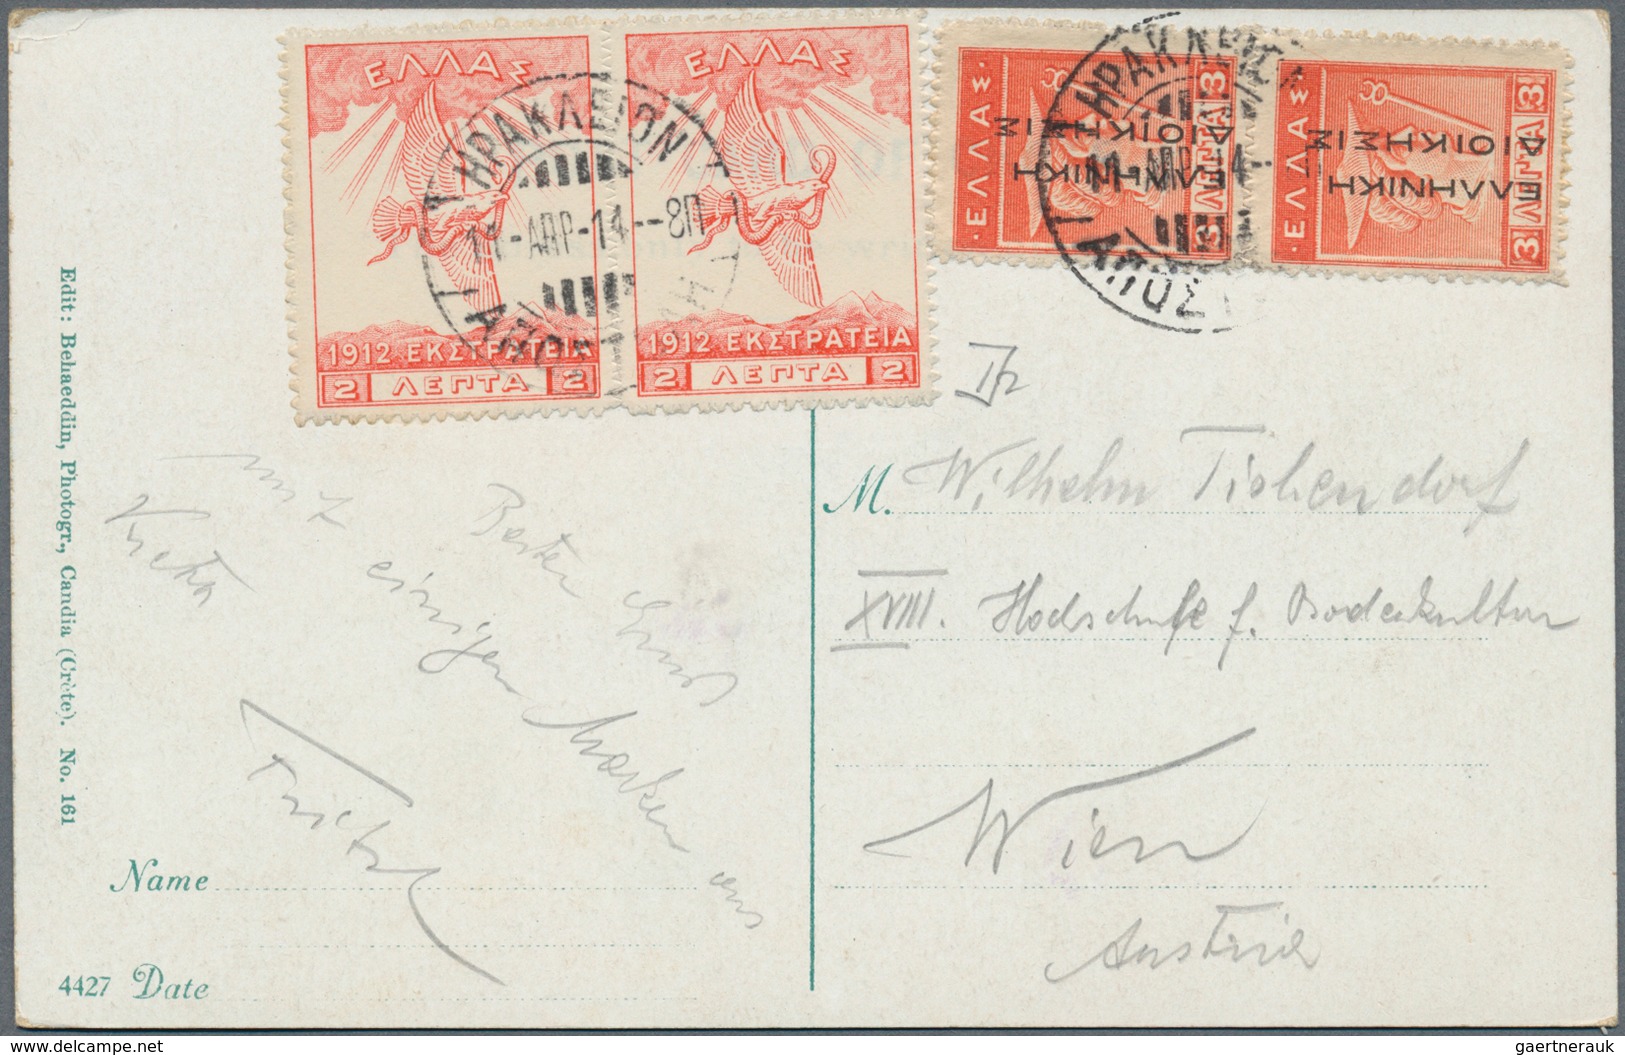 29581 Alle Welt: 1870/1940 ca., comprehensive lot with ca.270 covers, comprising mainly postal stationerie